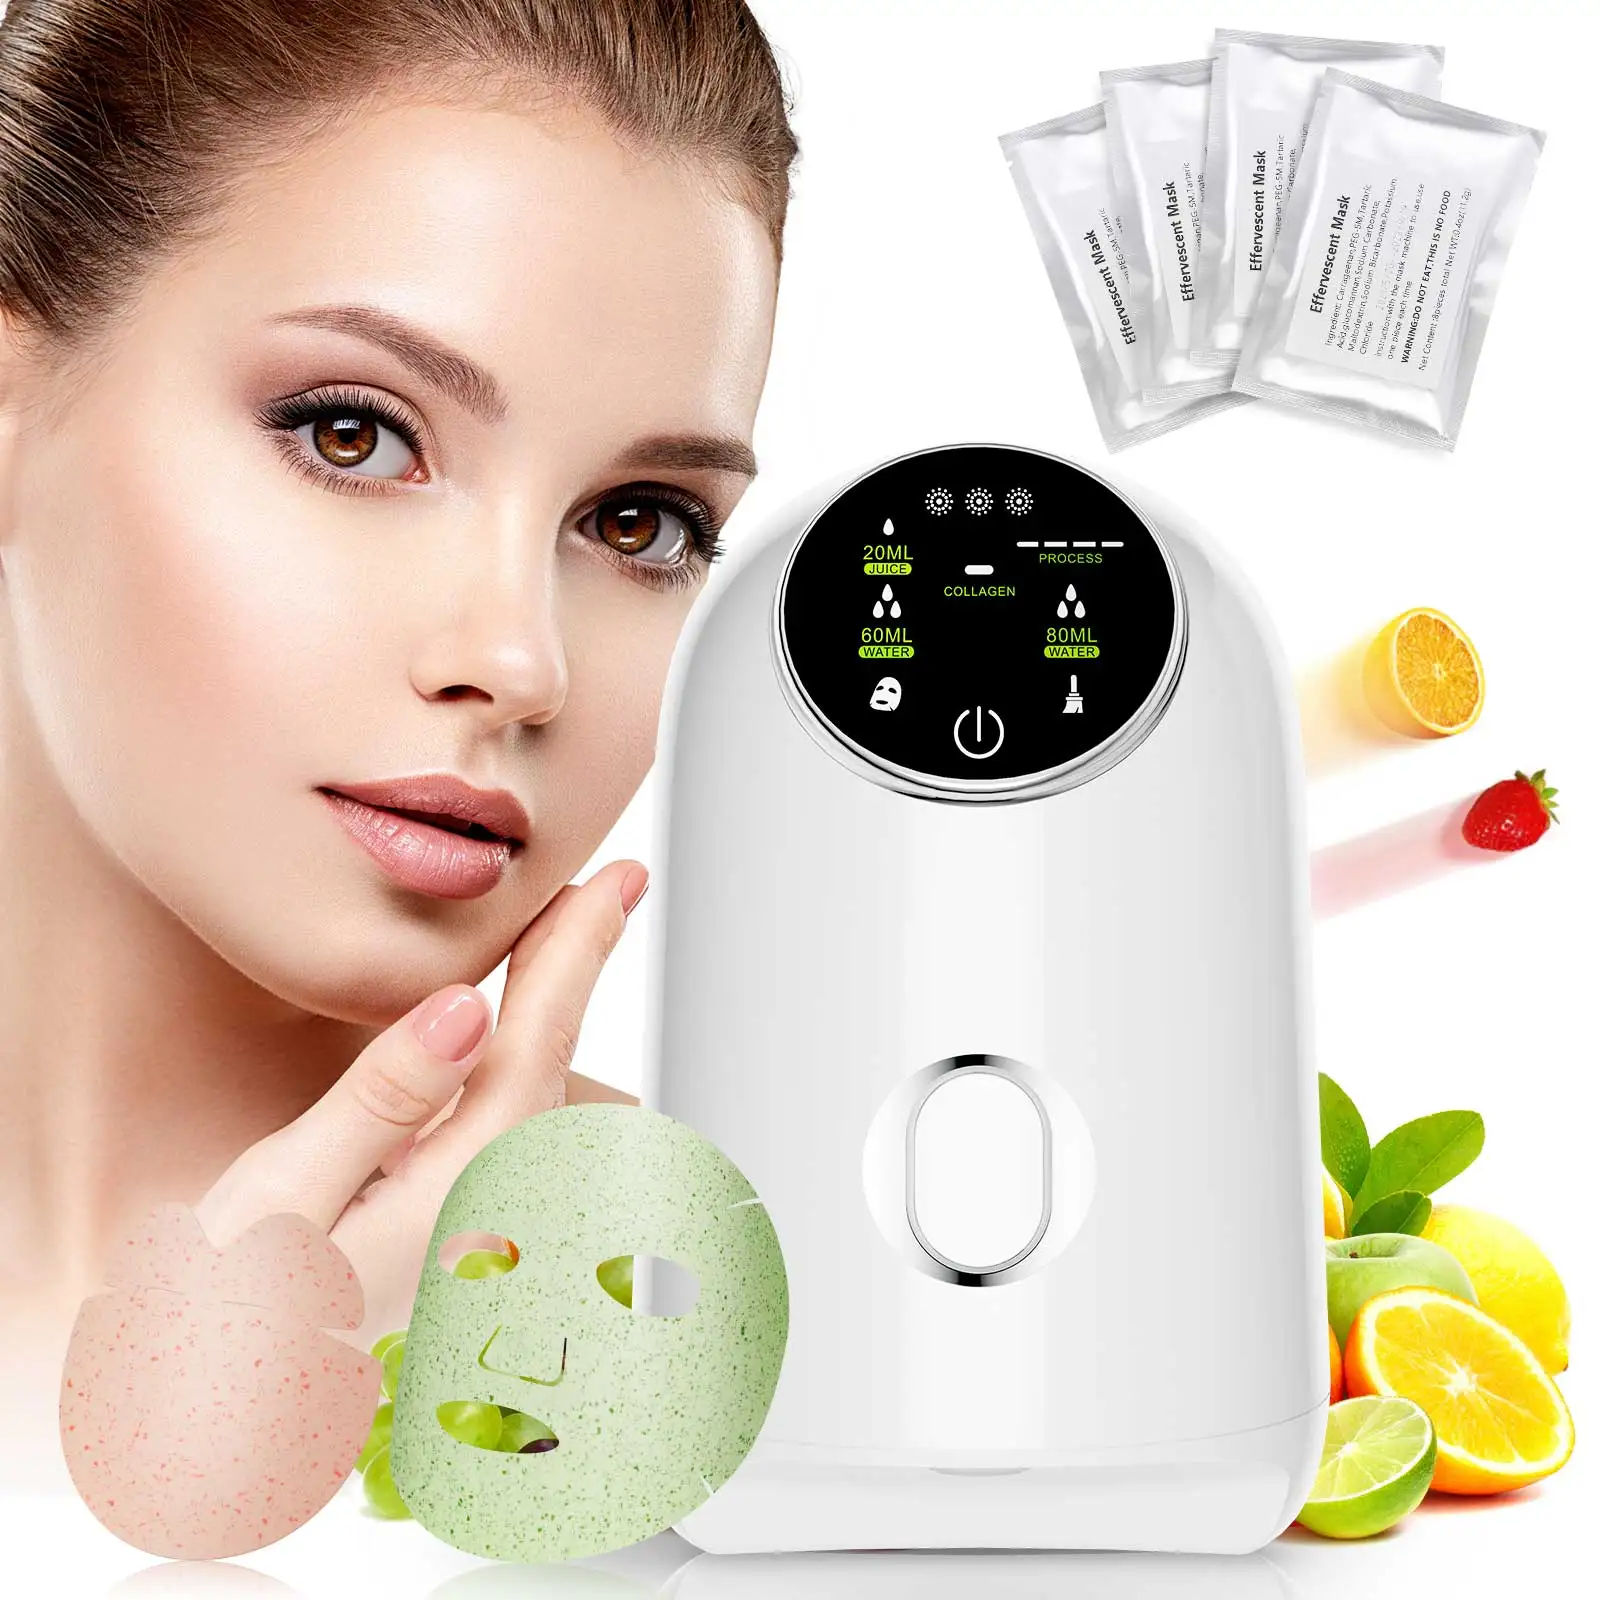 

Home Use Automatic DIY Fruit Vegetable Skincare Acne Treatment Hydration Anti Aging with 32pcs Collagen Beauty Facial Mask Maker